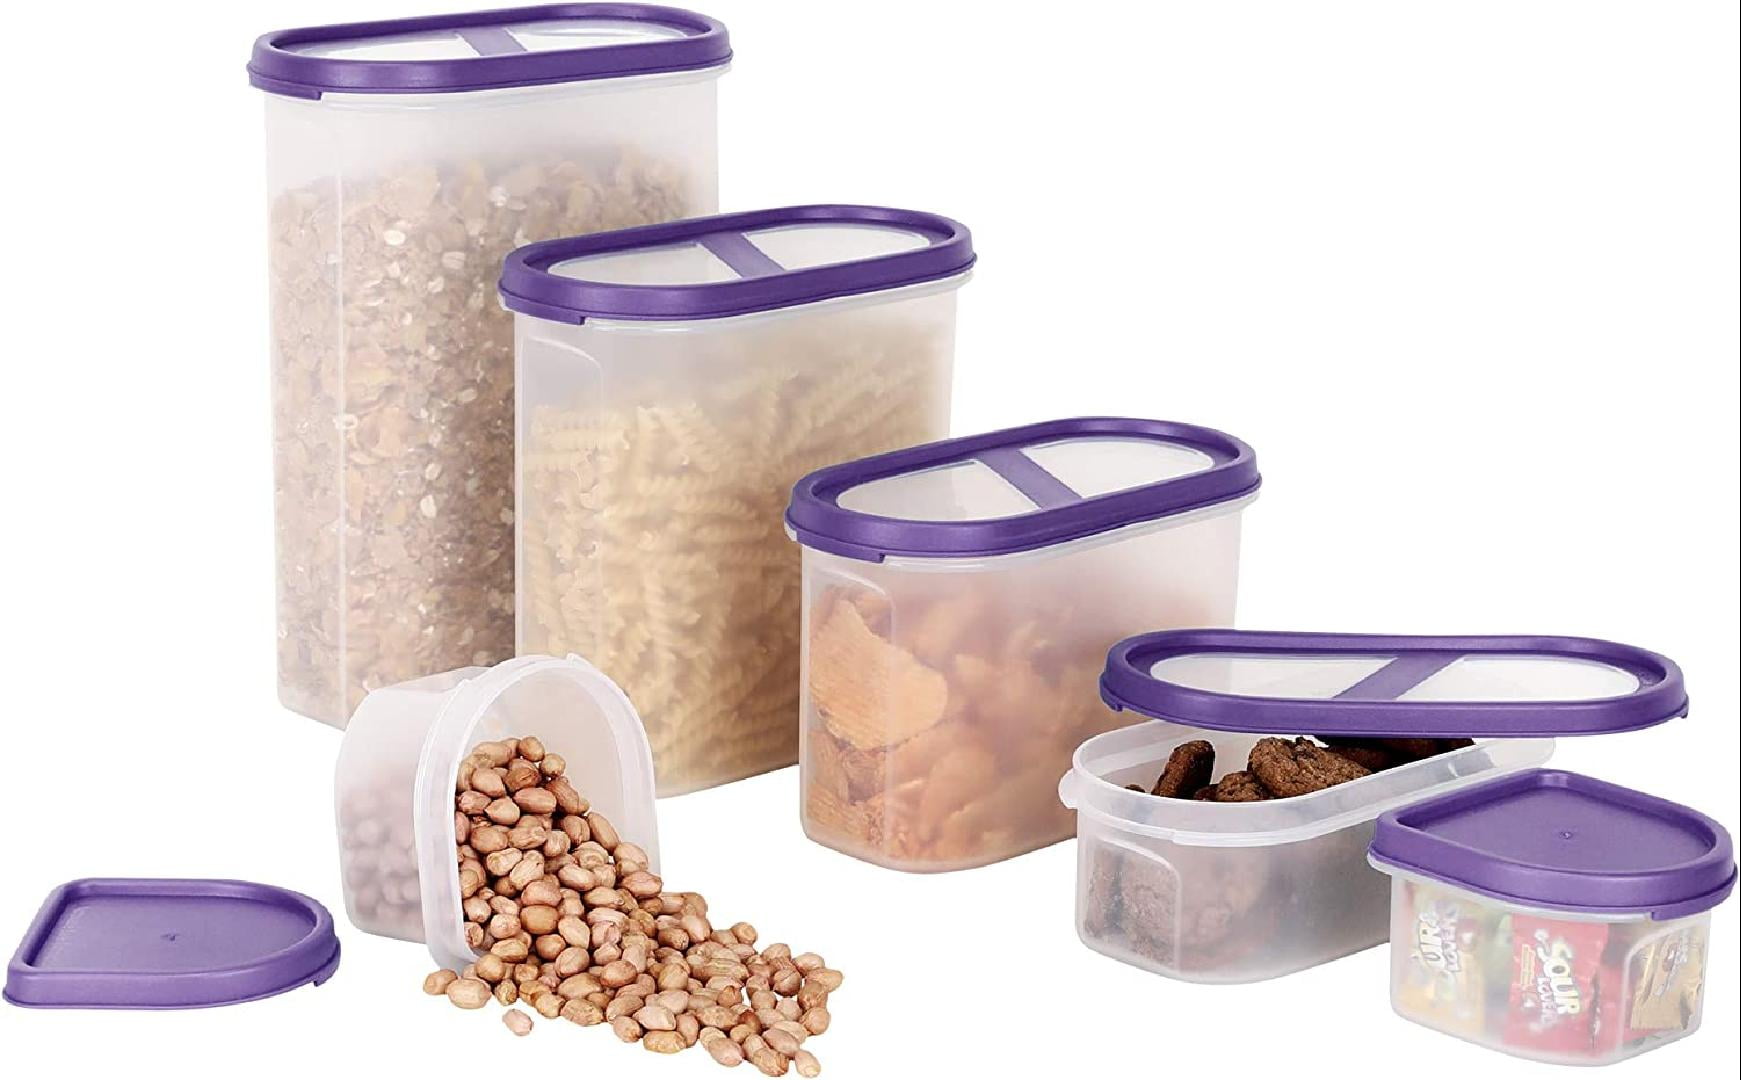 DWËLLZA KITCHEN Airtight Food Storage Containers with Lids Airtight - 6  Piece Set/All Same Size - Medium Air Tight Snacks Pantry & Kitchen Container  - Clear Plastic BPA-Free - Keeps Food Fresh